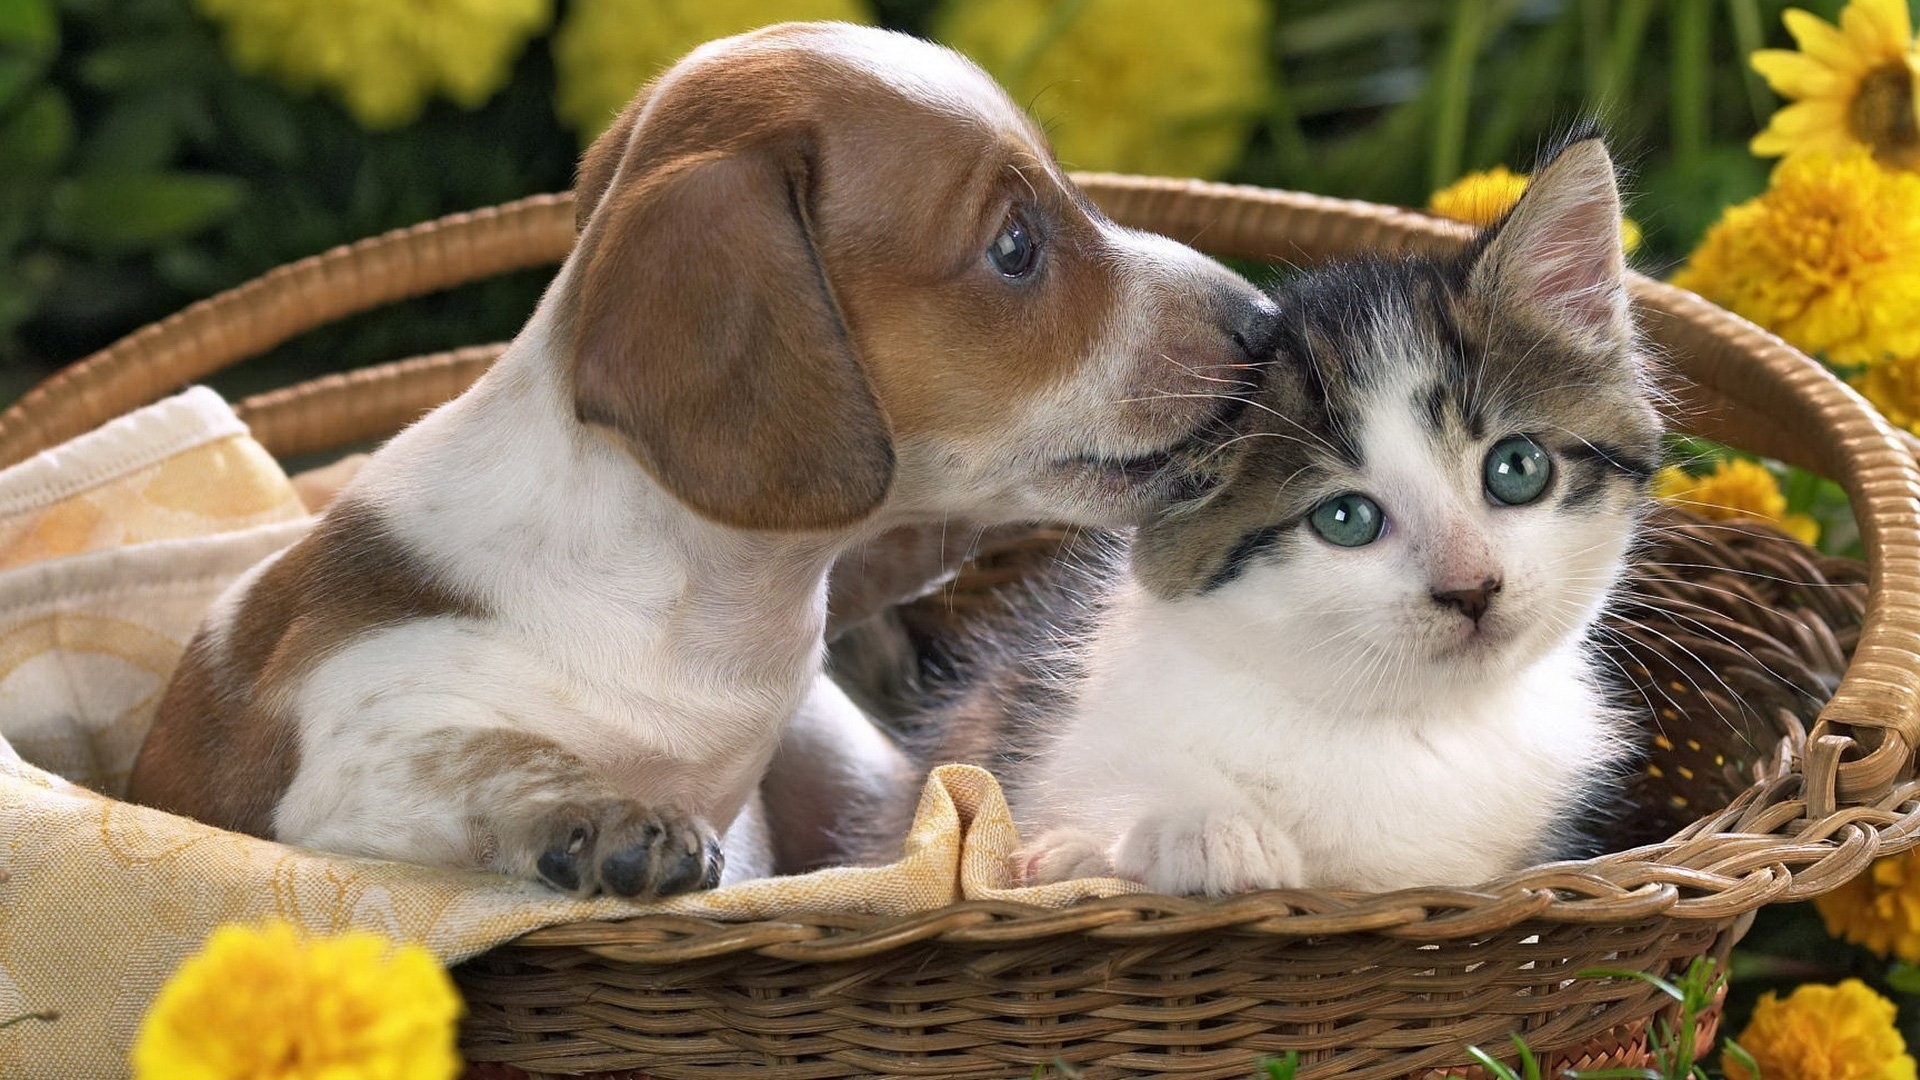 Pet Wallpapers - Kittens And Puppies - HD Wallpaper 